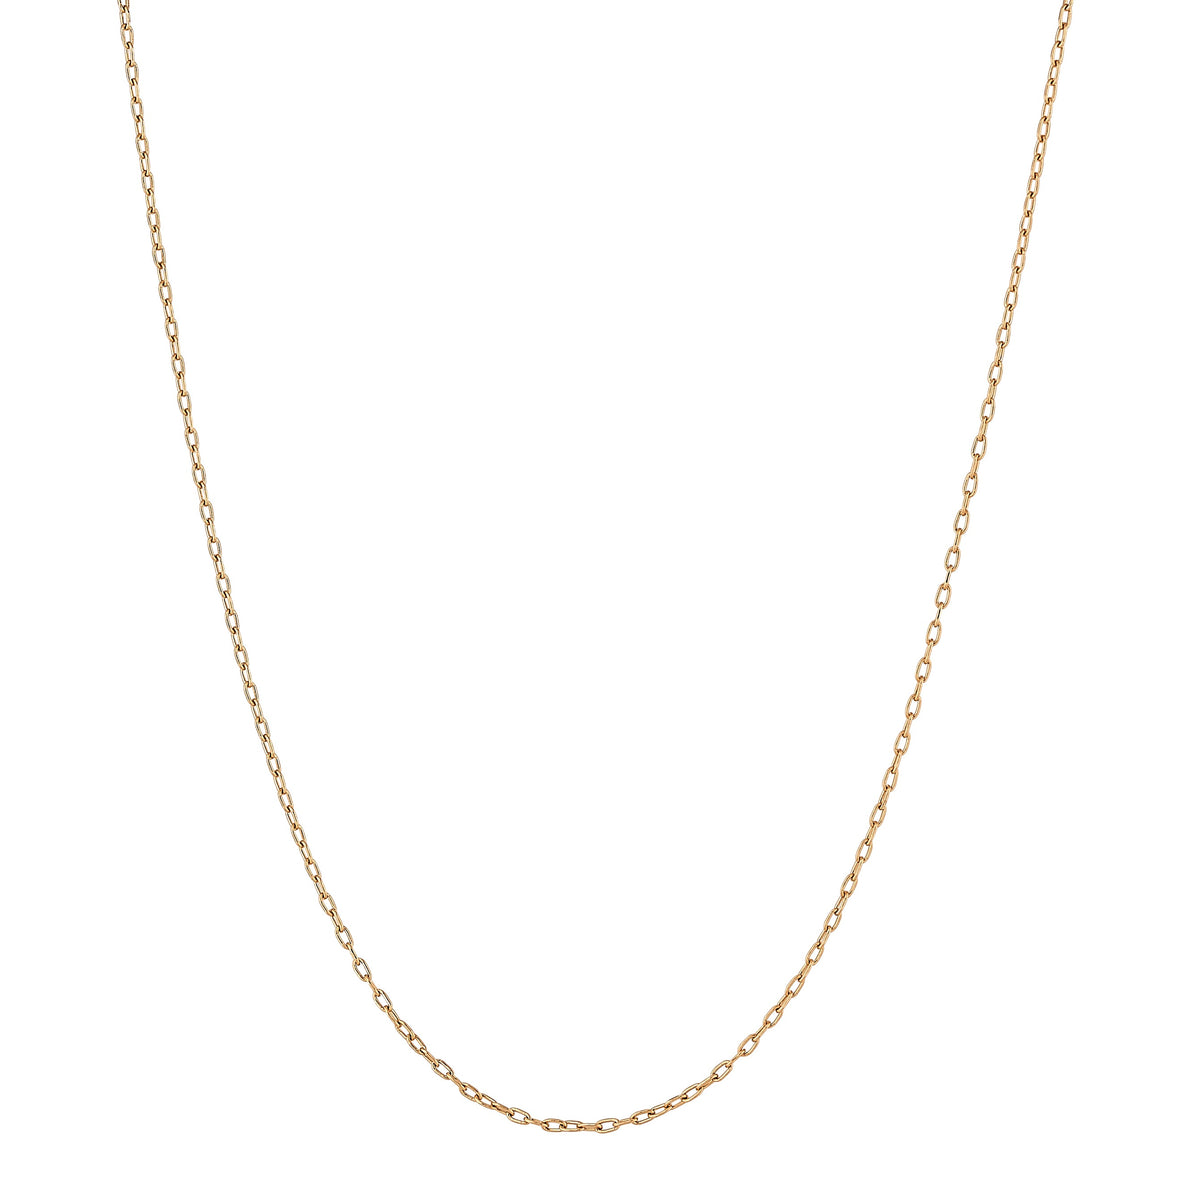 Gold 16" Skinny Oval Link Chain